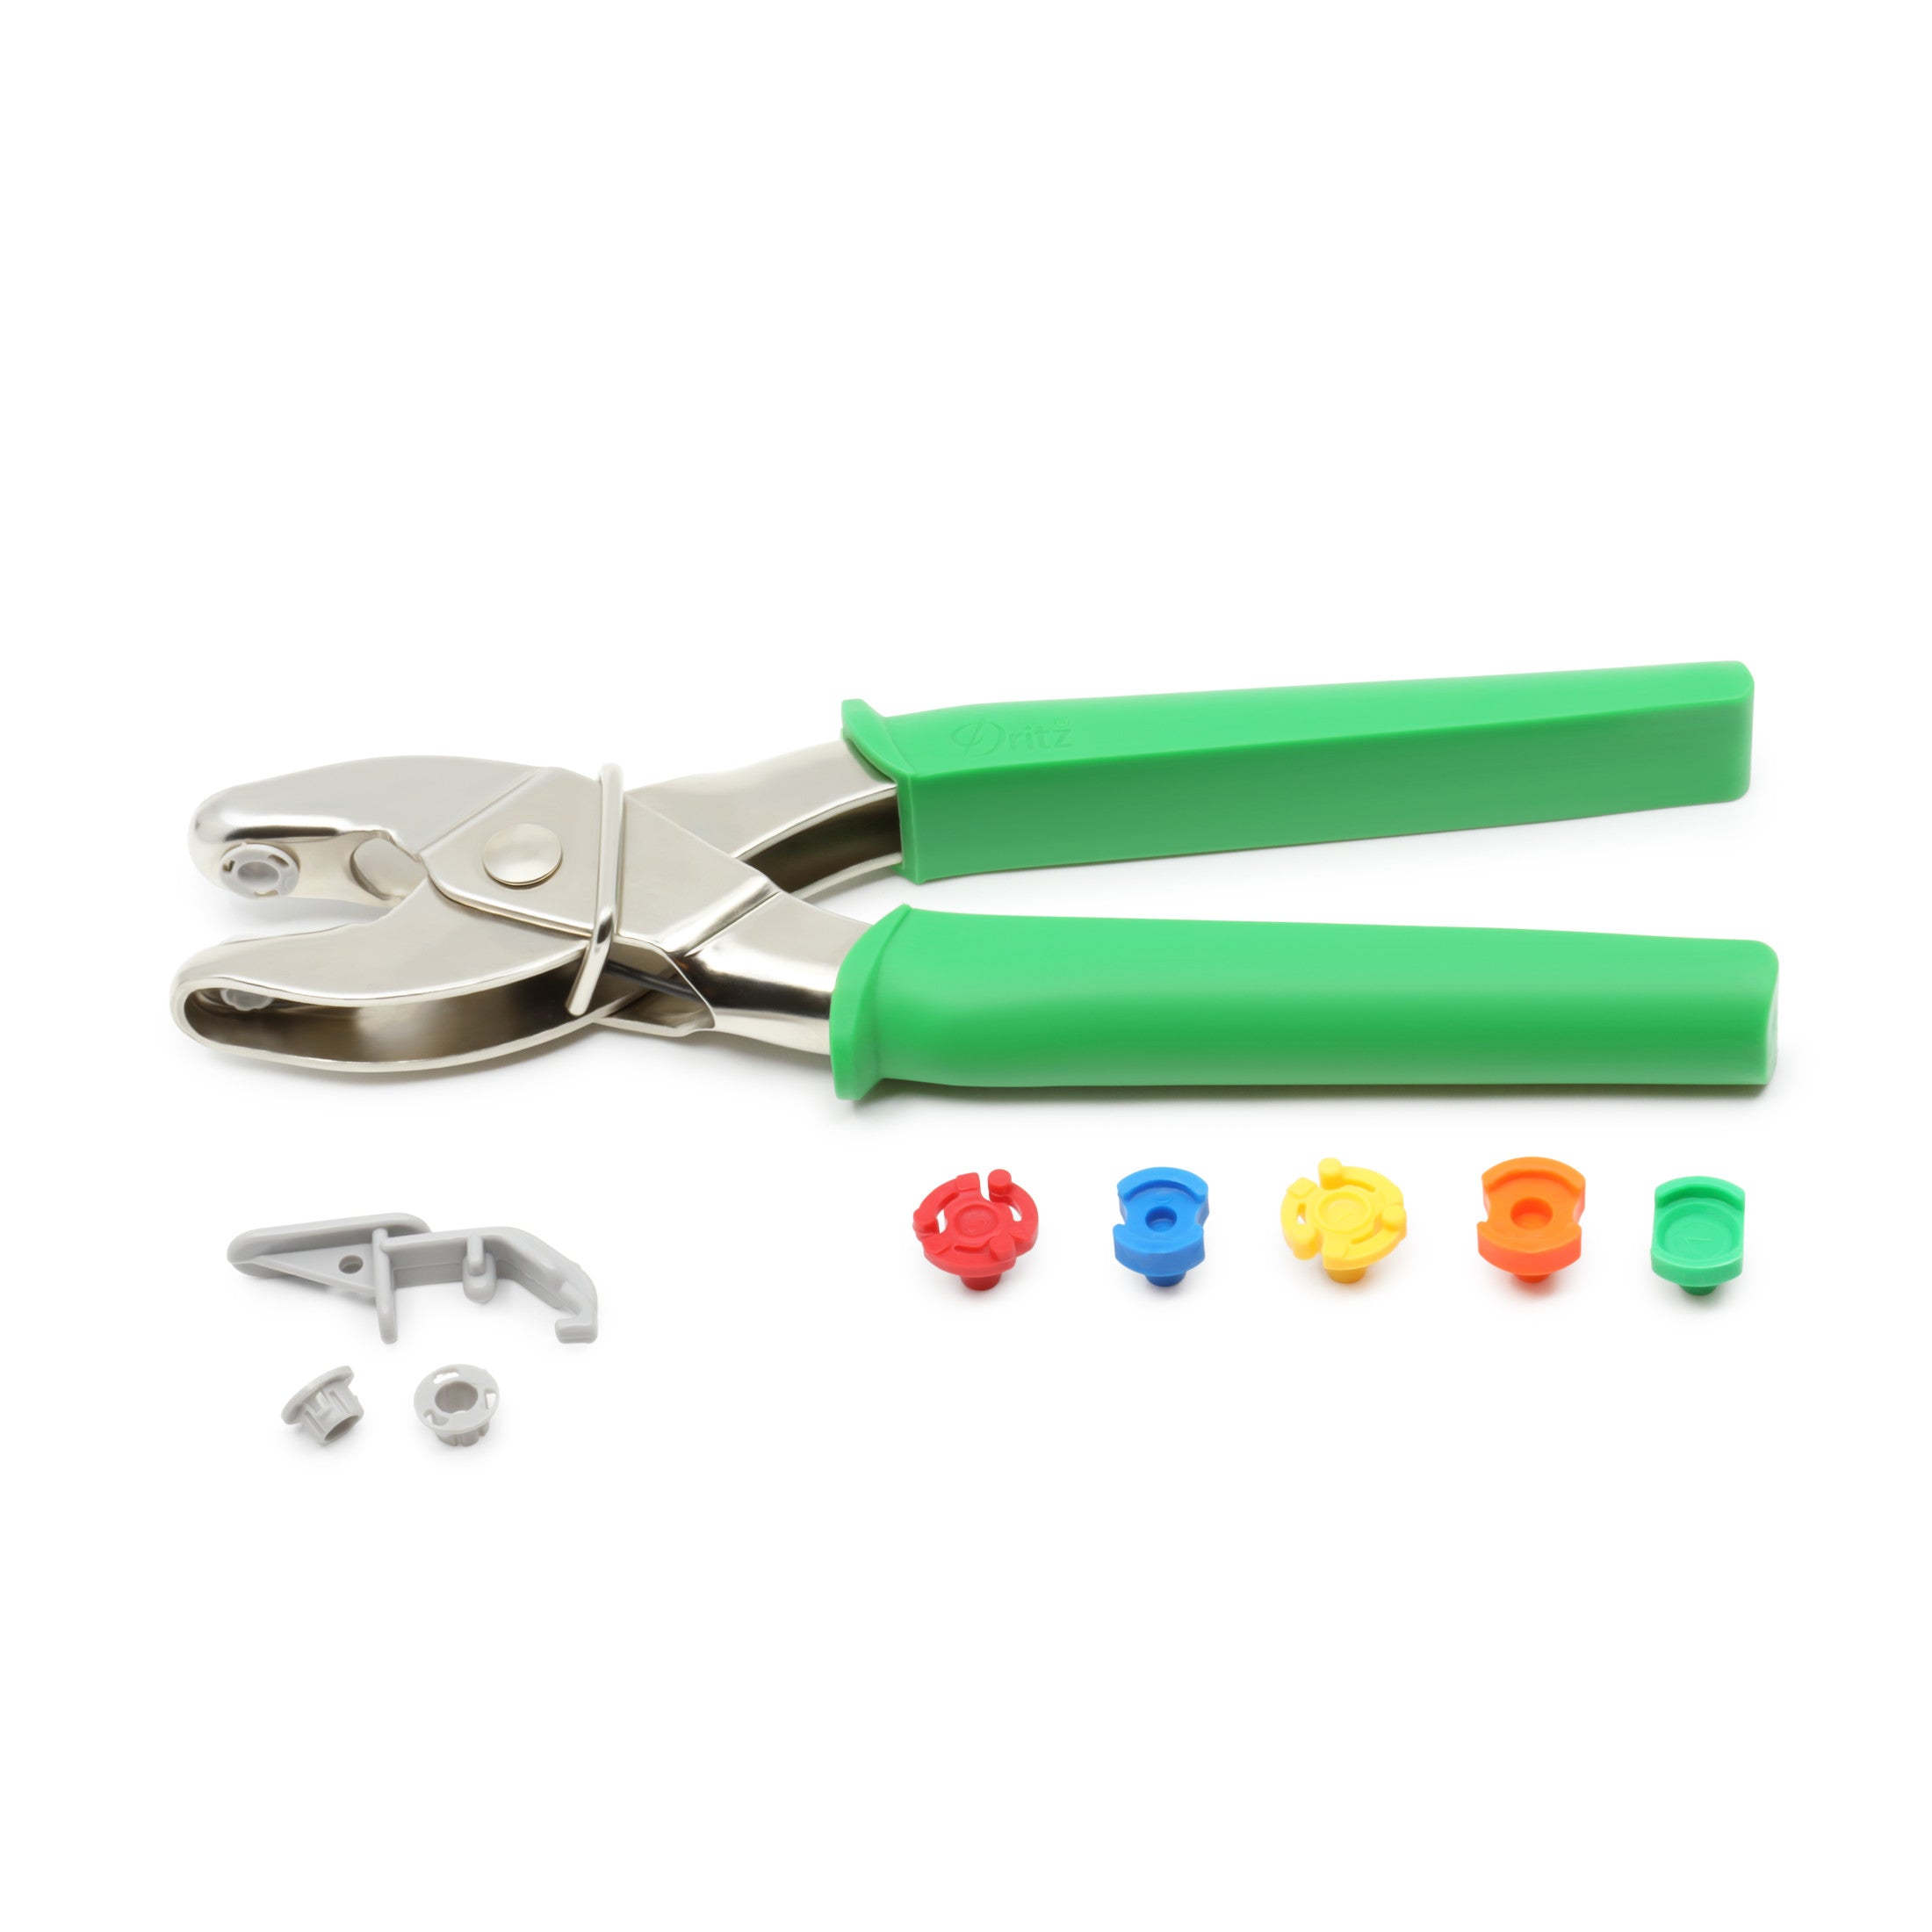 Snap Pliers for 3/8 Open-Ring & 7/16 Pearl Snaps, Green